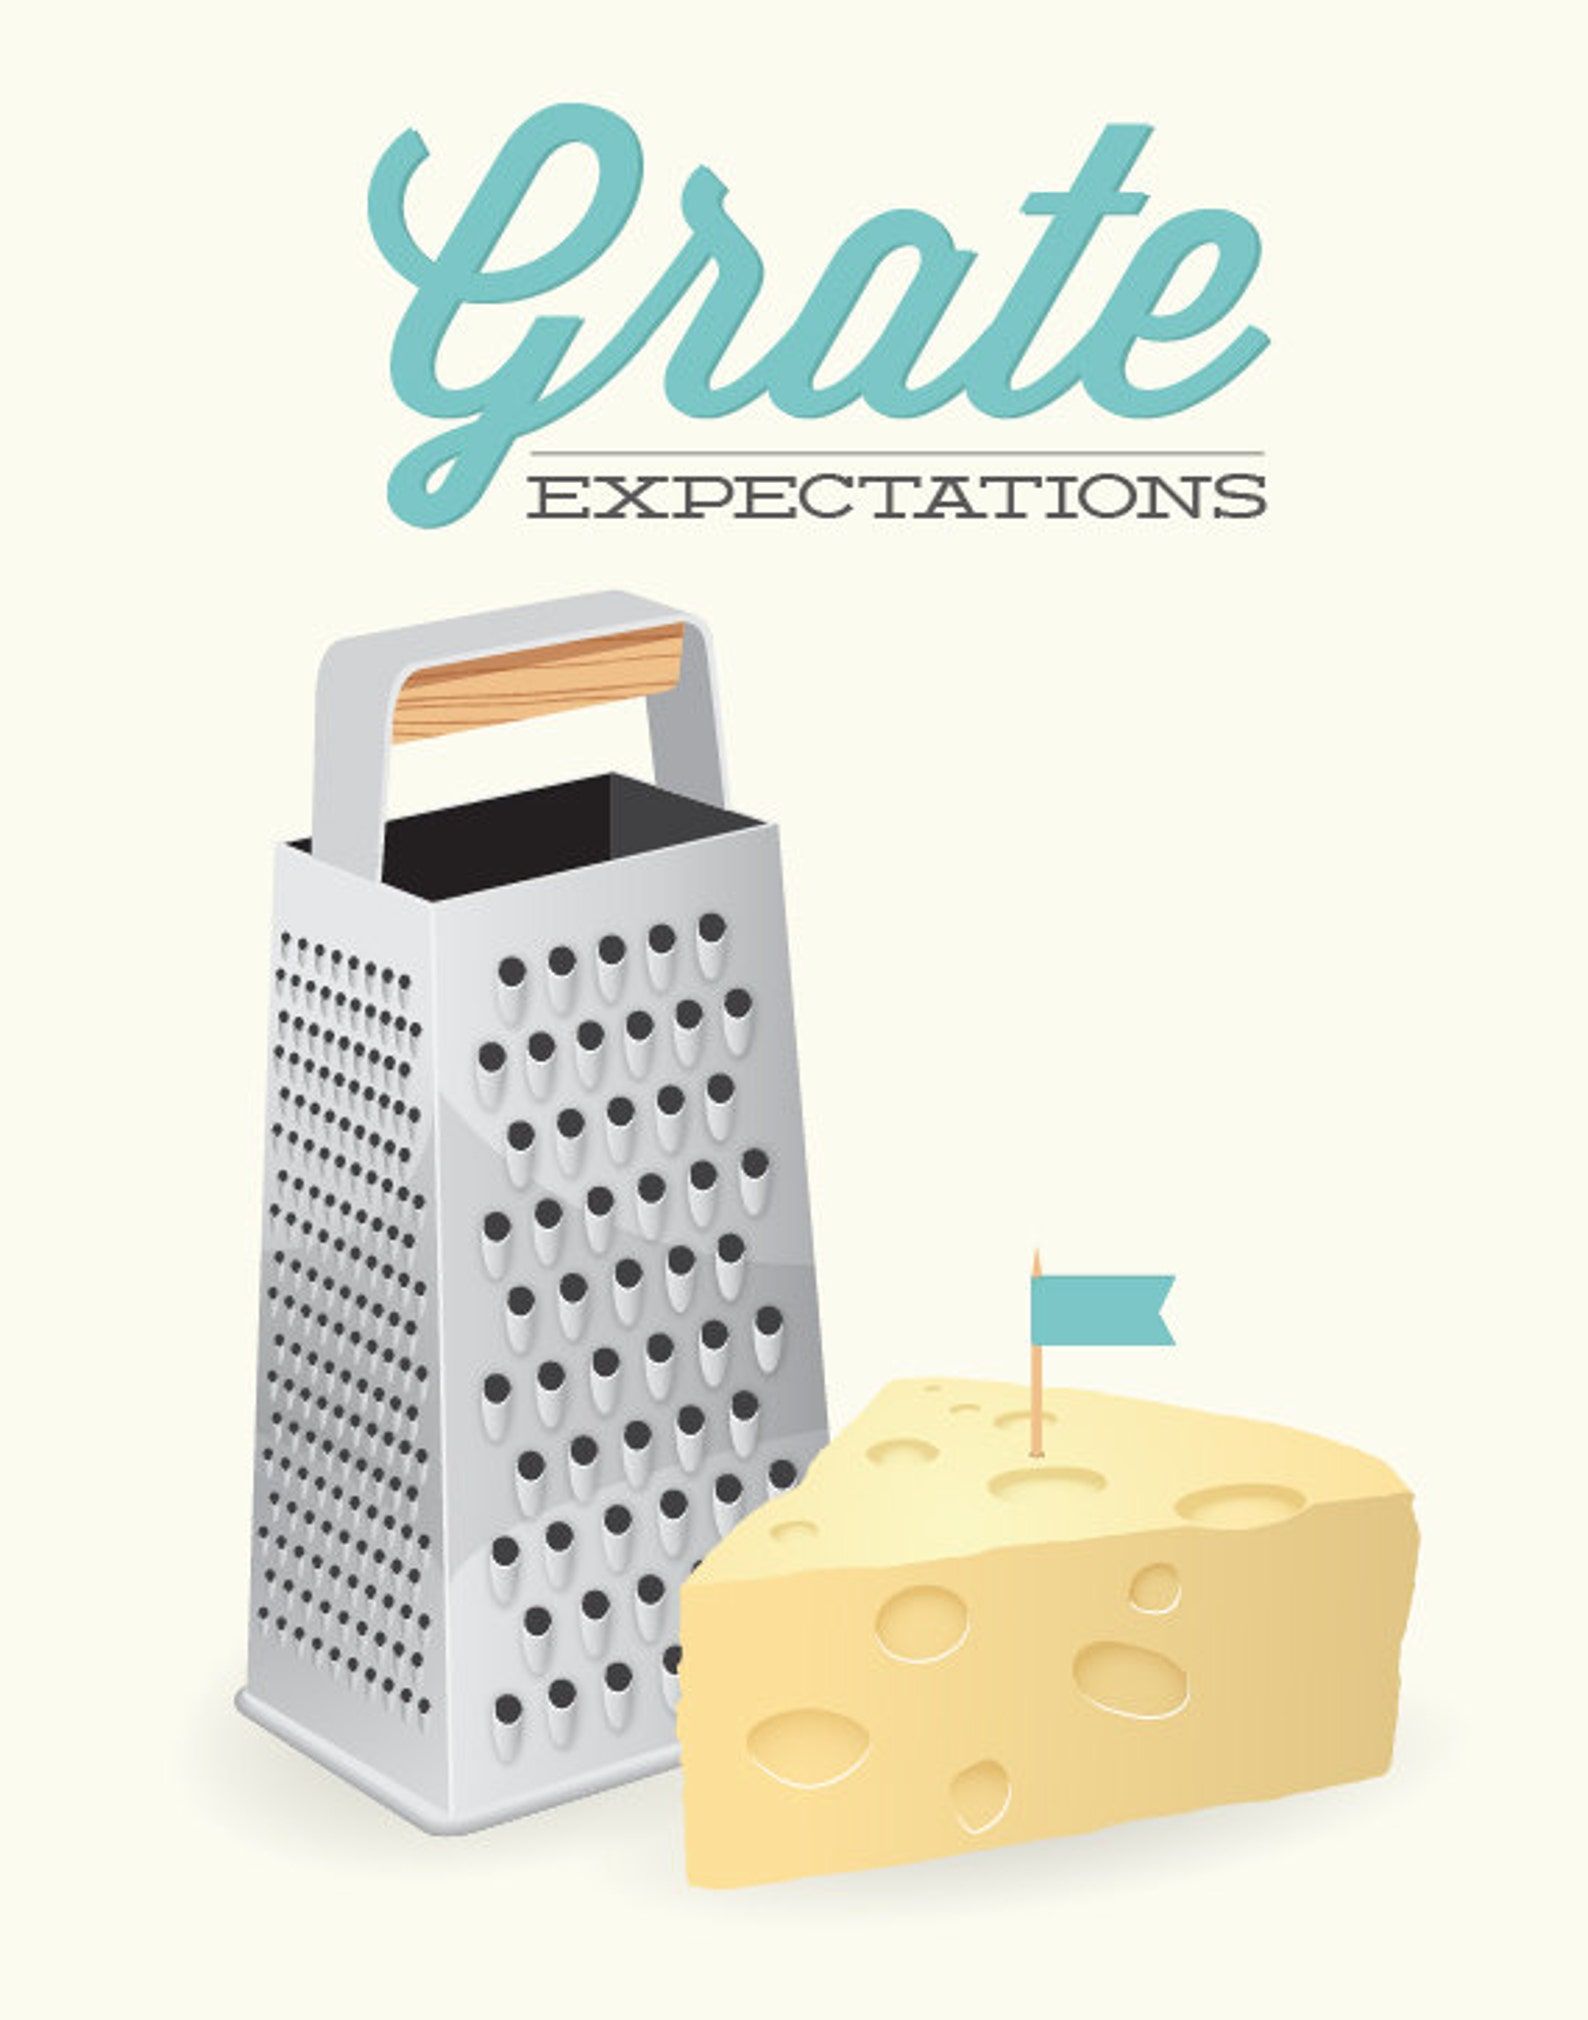 A graphic illustration meant to be framed and hung on a wall. "Grate Expectations" is at the top, with a cheese grater and a wedge of cheese at the bottom.